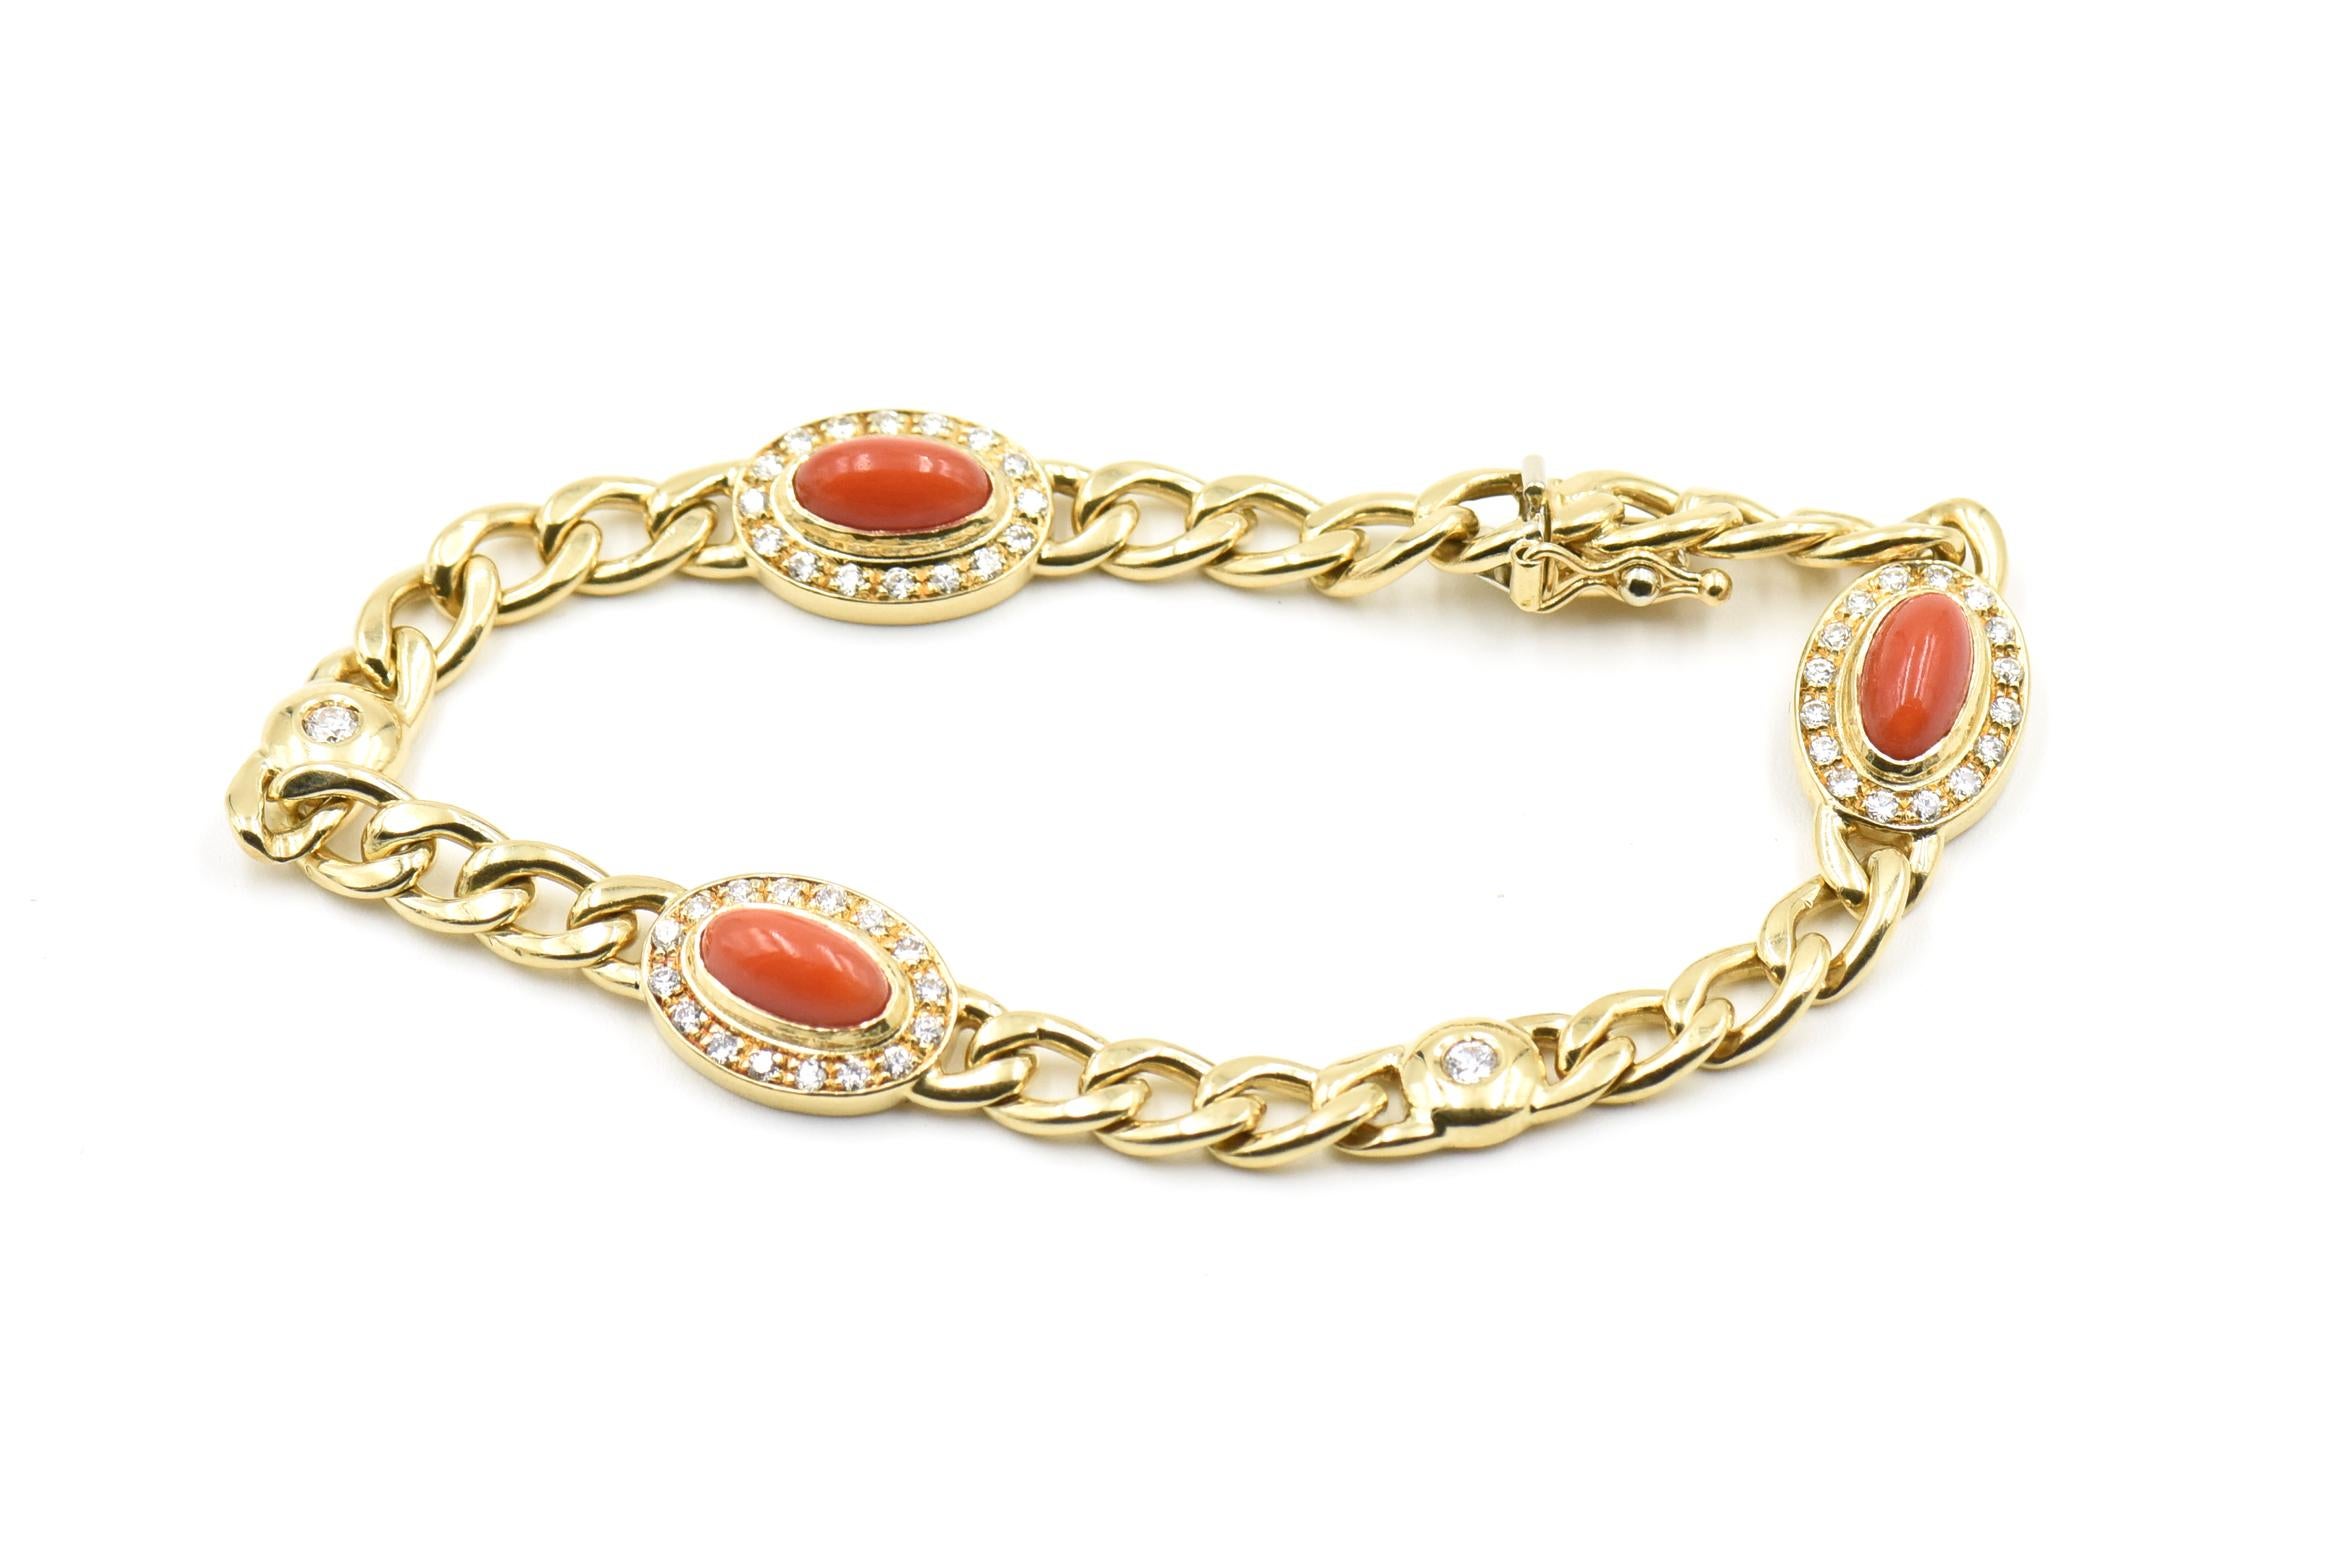 Classic 18k gold chain by Italian jeweler Unoaerre. The chain is accented by three oval red coral cabochons that are framed by diamonds.  Another 2 diamonds in gold circles accent the links.

Marked with  UnaAErre Hallmark and 750 on the